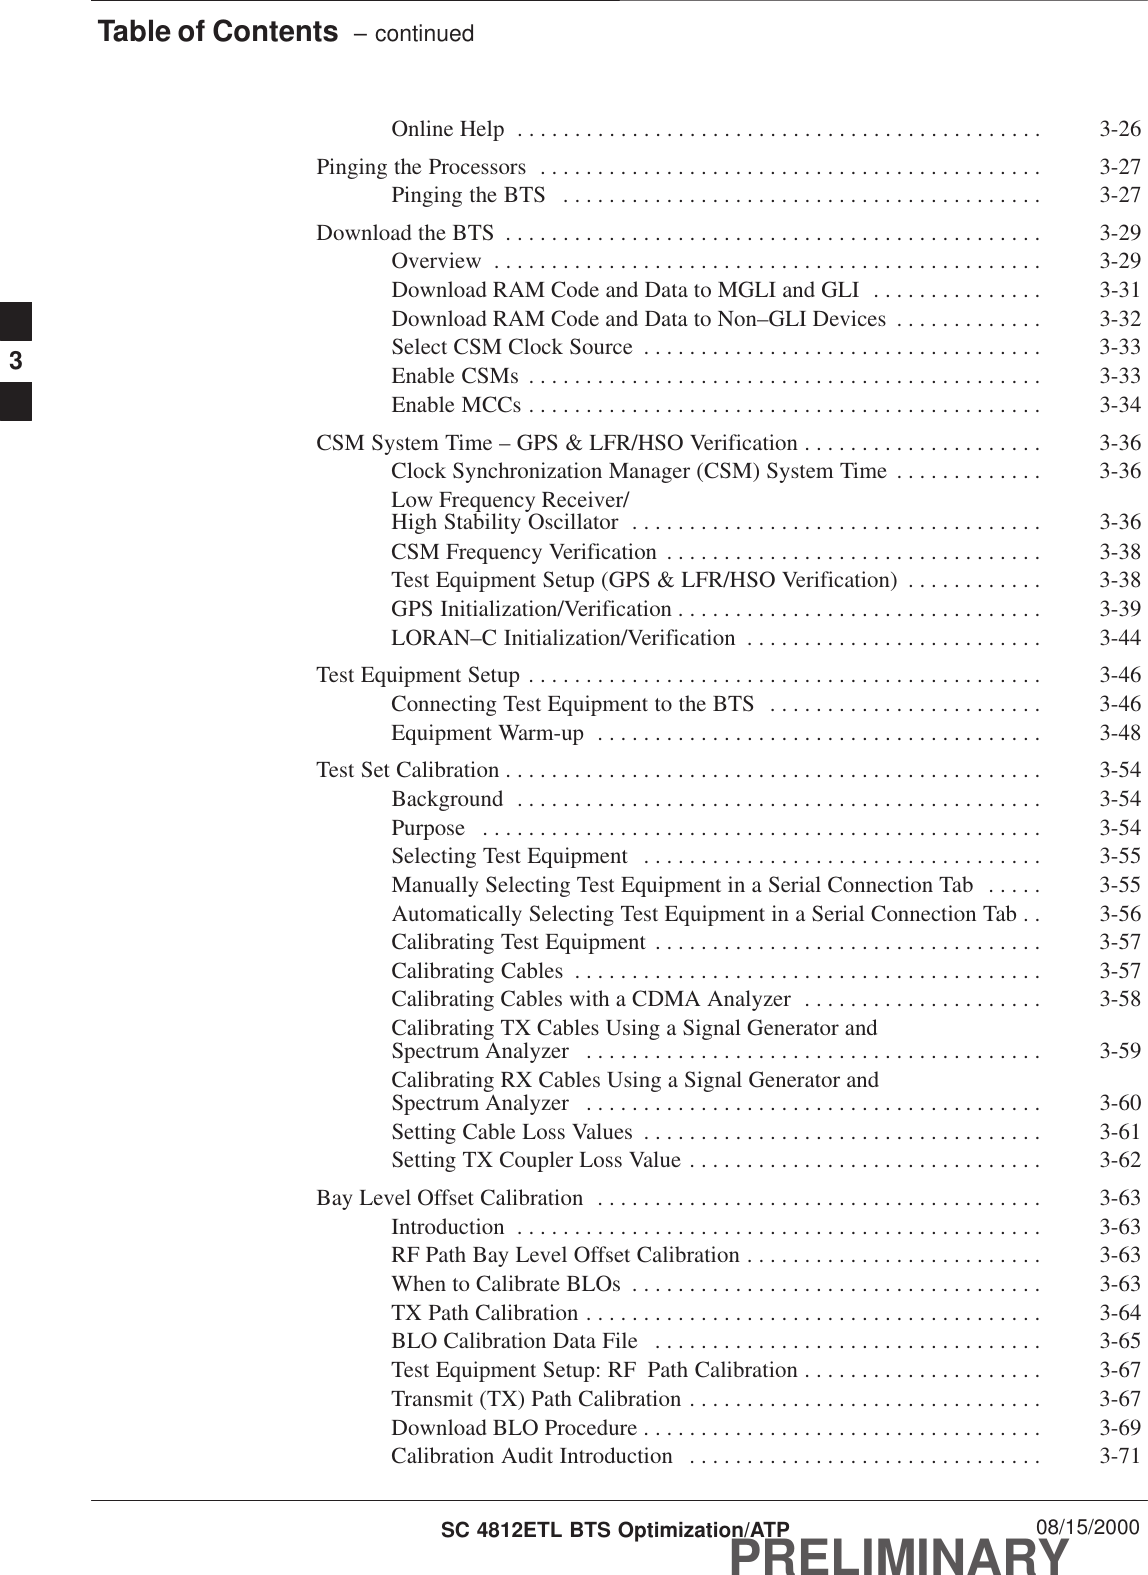 Table of Contents  – continuedPRELIMINARYSC 4812ETL BTS Optimization/ATP 08/15/2000Online Help 3-26. . . . . . . . . . . . . . . . . . . . . . . . . . . . . . . . . . . . . . . . . . . . . . Pinging the Processors 3-27. . . . . . . . . . . . . . . . . . . . . . . . . . . . . . . . . . . . . . . . . . . . Pinging the BTS 3-27. . . . . . . . . . . . . . . . . . . . . . . . . . . . . . . . . . . . . . . . . . Download the BTS 3-29. . . . . . . . . . . . . . . . . . . . . . . . . . . . . . . . . . . . . . . . . . . . . . . Overview 3-29. . . . . . . . . . . . . . . . . . . . . . . . . . . . . . . . . . . . . . . . . . . . . . . . Download RAM Code and Data to MGLI and GLI 3-31. . . . . . . . . . . . . . . Download RAM Code and Data to Non–GLI Devices 3-32. . . . . . . . . . . . . Select CSM Clock Source 3-33. . . . . . . . . . . . . . . . . . . . . . . . . . . . . . . . . . . Enable CSMs 3-33. . . . . . . . . . . . . . . . . . . . . . . . . . . . . . . . . . . . . . . . . . . . . Enable MCCs 3-34. . . . . . . . . . . . . . . . . . . . . . . . . . . . . . . . . . . . . . . . . . . . . CSM System Time – GPS &amp; LFR/HSO Verification 3-36. . . . . . . . . . . . . . . . . . . . . Clock Synchronization Manager (CSM) System Time 3-36. . . . . . . . . . . . . Low Frequency Receiver/High Stability Oscillator 3-36. . . . . . . . . . . . . . . . . . . . . . . . . . . . . . . . . . . . CSM Frequency Verification 3-38. . . . . . . . . . . . . . . . . . . . . . . . . . . . . . . . . Test Equipment Setup (GPS &amp; LFR/HSO Verification) 3-38. . . . . . . . . . . . GPS Initialization/Verification 3-39. . . . . . . . . . . . . . . . . . . . . . . . . . . . . . . . LORAN–C Initialization/Verification 3-44. . . . . . . . . . . . . . . . . . . . . . . . . . Test Equipment Setup 3-46. . . . . . . . . . . . . . . . . . . . . . . . . . . . . . . . . . . . . . . . . . . . . Connecting Test Equipment to the BTS 3-46. . . . . . . . . . . . . . . . . . . . . . . . Equipment Warm-up 3-48. . . . . . . . . . . . . . . . . . . . . . . . . . . . . . . . . . . . . . . Test Set Calibration 3-54. . . . . . . . . . . . . . . . . . . . . . . . . . . . . . . . . . . . . . . . . . . . . . . Background 3-54. . . . . . . . . . . . . . . . . . . . . . . . . . . . . . . . . . . . . . . . . . . . . . Purpose 3-54. . . . . . . . . . . . . . . . . . . . . . . . . . . . . . . . . . . . . . . . . . . . . . . . . Selecting Test Equipment 3-55. . . . . . . . . . . . . . . . . . . . . . . . . . . . . . . . . . . Manually Selecting Test Equipment in a Serial Connection Tab 3-55. . . . . Automatically Selecting Test Equipment in a Serial Connection Tab 3-56. . Calibrating Test Equipment 3-57. . . . . . . . . . . . . . . . . . . . . . . . . . . . . . . . . . Calibrating Cables 3-57. . . . . . . . . . . . . . . . . . . . . . . . . . . . . . . . . . . . . . . . . Calibrating Cables with a CDMA Analyzer 3-58. . . . . . . . . . . . . . . . . . . . . Calibrating TX Cables Using a Signal Generator and Spectrum Analyzer 3-59. . . . . . . . . . . . . . . . . . . . . . . . . . . . . . . . . . . . . . . . Calibrating RX Cables Using a Signal Generator and Spectrum Analyzer 3-60. . . . . . . . . . . . . . . . . . . . . . . . . . . . . . . . . . . . . . . . Setting Cable Loss Values 3-61. . . . . . . . . . . . . . . . . . . . . . . . . . . . . . . . . . . Setting TX Coupler Loss Value 3-62. . . . . . . . . . . . . . . . . . . . . . . . . . . . . . . Bay Level Offset Calibration 3-63. . . . . . . . . . . . . . . . . . . . . . . . . . . . . . . . . . . . . . . Introduction 3-63. . . . . . . . . . . . . . . . . . . . . . . . . . . . . . . . . . . . . . . . . . . . . . RF Path Bay Level Offset Calibration 3-63. . . . . . . . . . . . . . . . . . . . . . . . . . When to Calibrate BLOs 3-63. . . . . . . . . . . . . . . . . . . . . . . . . . . . . . . . . . . . TX Path Calibration 3-64. . . . . . . . . . . . . . . . . . . . . . . . . . . . . . . . . . . . . . . . BLO Calibration Data File 3-65. . . . . . . . . . . . . . . . . . . . . . . . . . . . . . . . . . Test Equipment Setup: RF Path Calibration 3-67. . . . . . . . . . . . . . . . . . . . . Transmit (TX) Path Calibration 3-67. . . . . . . . . . . . . . . . . . . . . . . . . . . . . . . Download BLO Procedure 3-69. . . . . . . . . . . . . . . . . . . . . . . . . . . . . . . . . . . Calibration Audit Introduction 3-71. . . . . . . . . . . . . . . . . . . . . . . . . . . . . . . 3